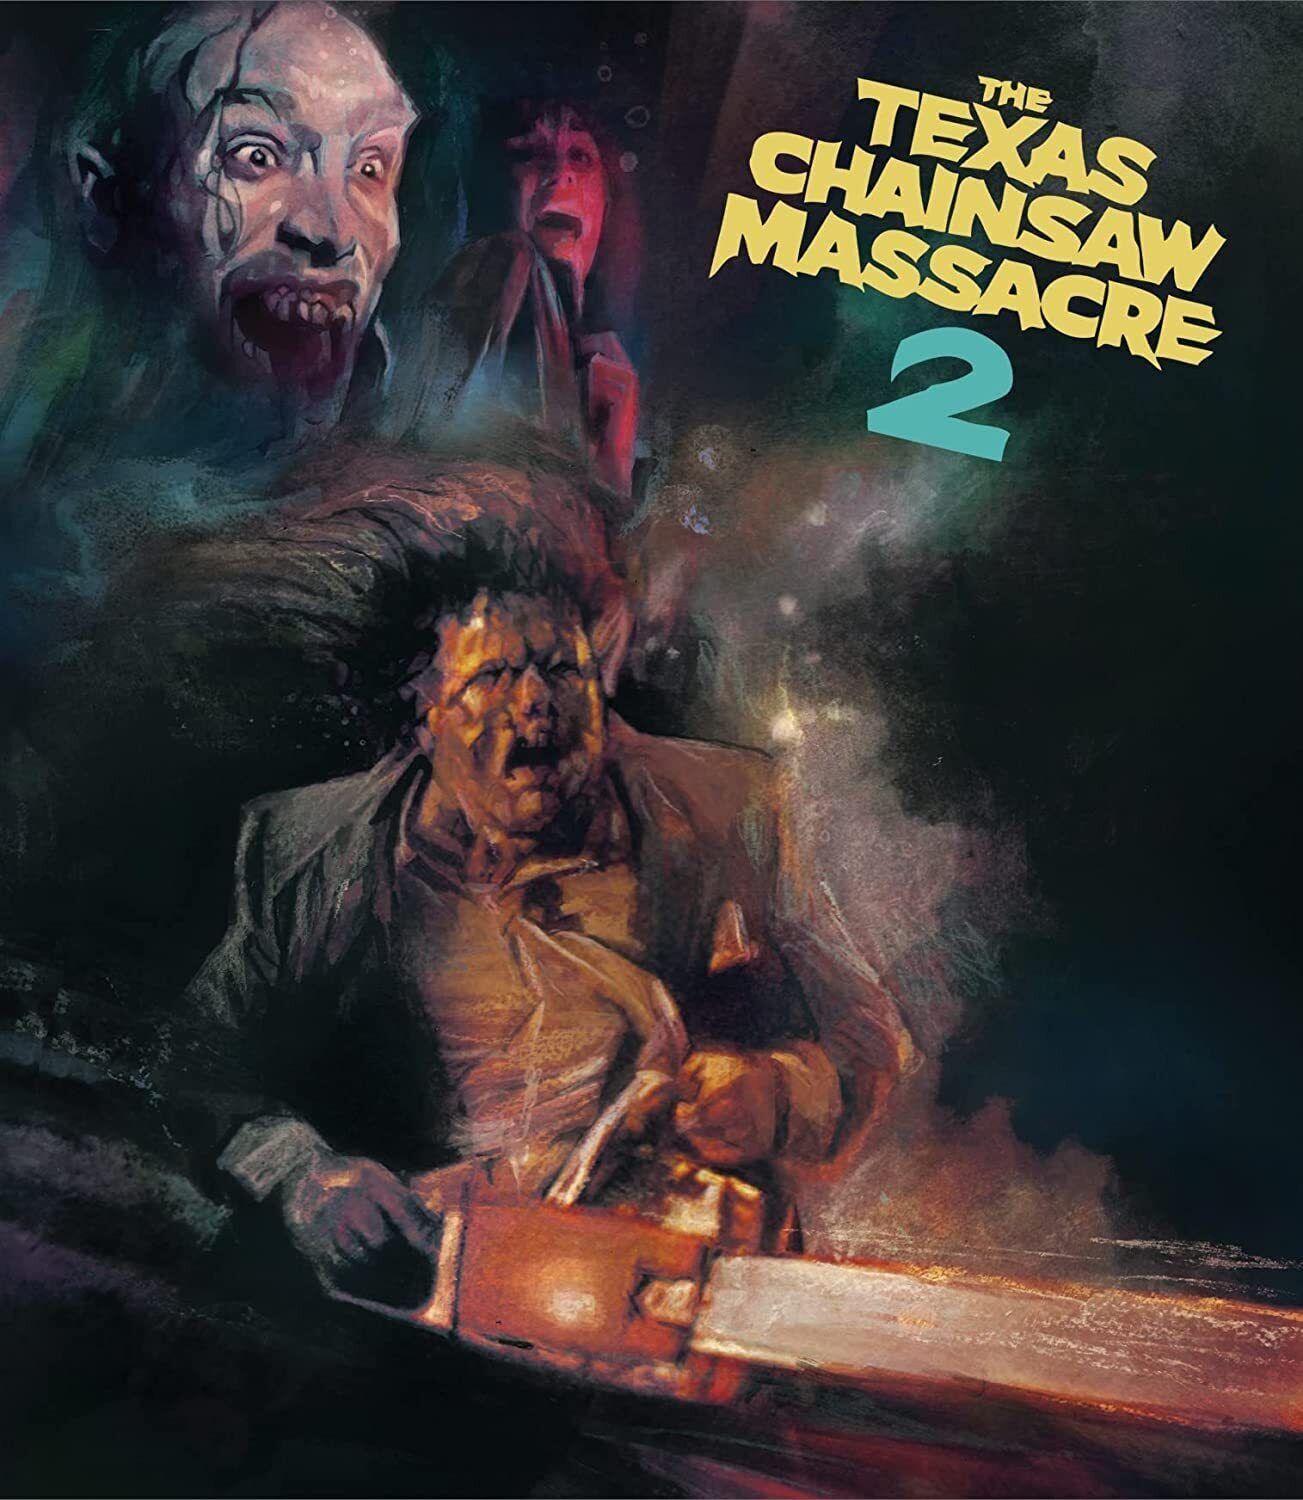 The Texas Chainsaw Massacre 2 4K: Limited Edition (VS#410)(Exclusive)